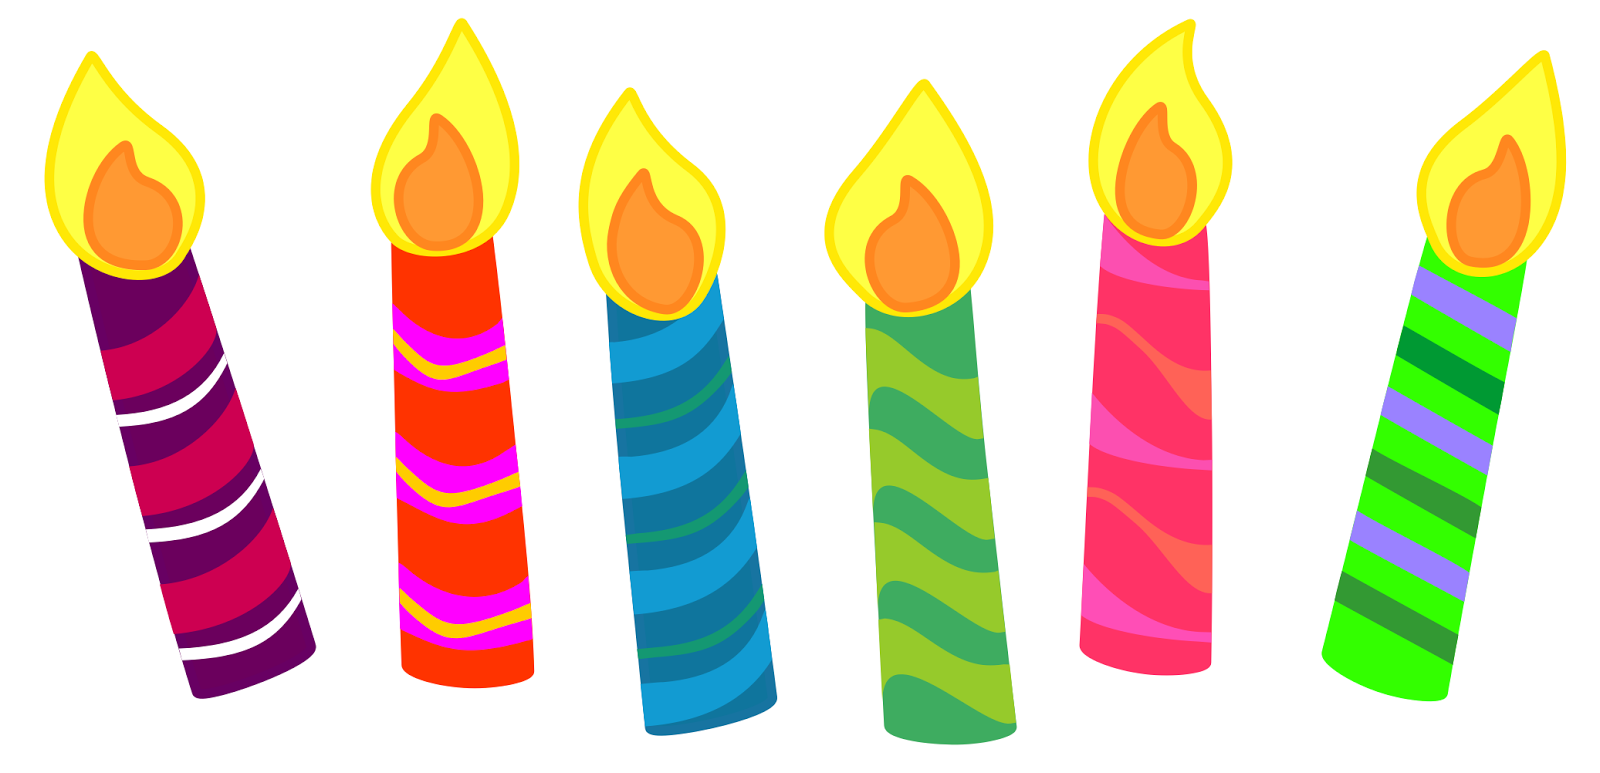 Candle Clipart Group (+), HD Clipart.